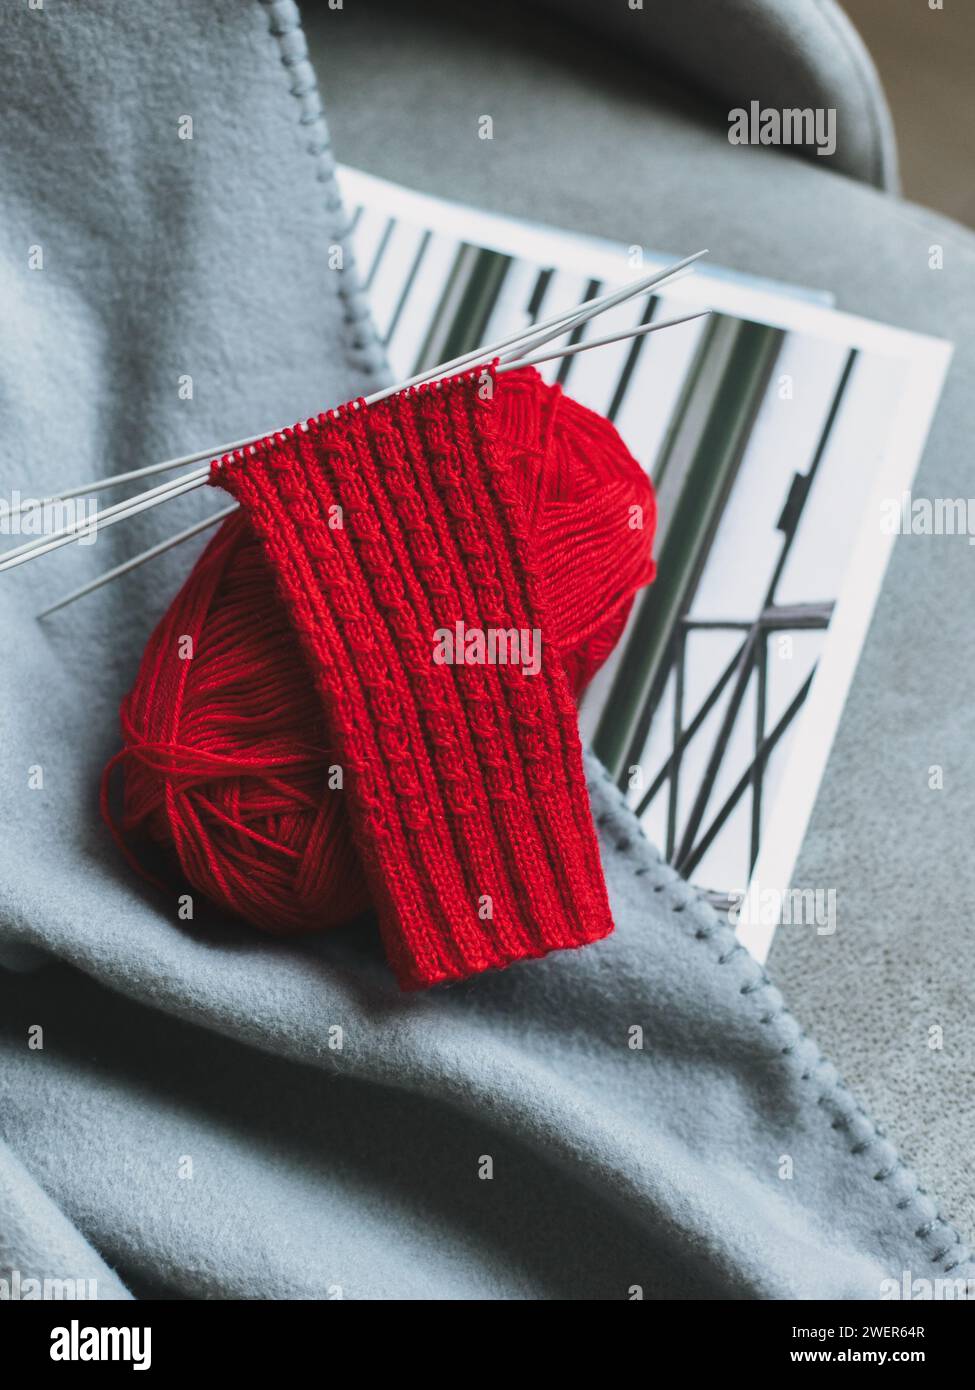 Hand knitted socks with needles and yarn ball. Concept for handmade and hygge slow life. Stock Photo